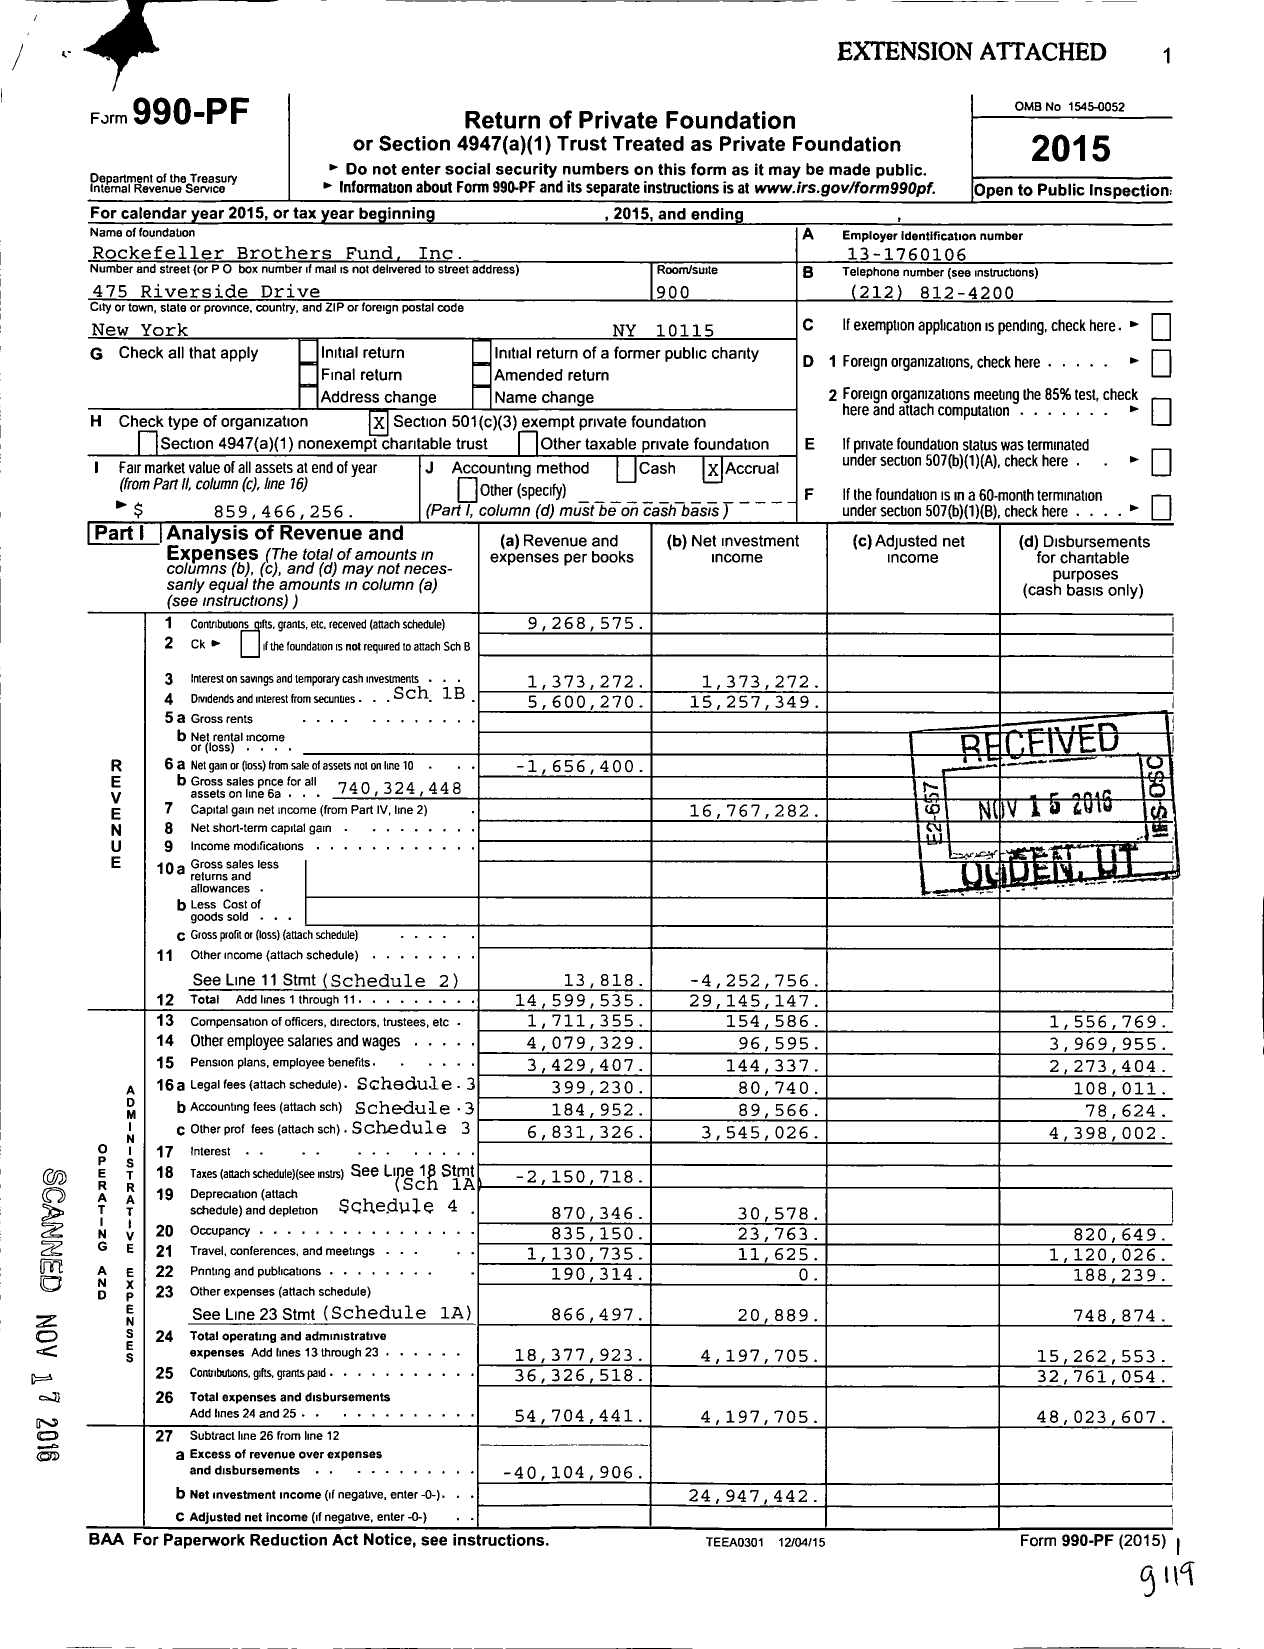 Image of first page of 2015 Form 990PF for Rockefeller Brothers Fund (RBF)